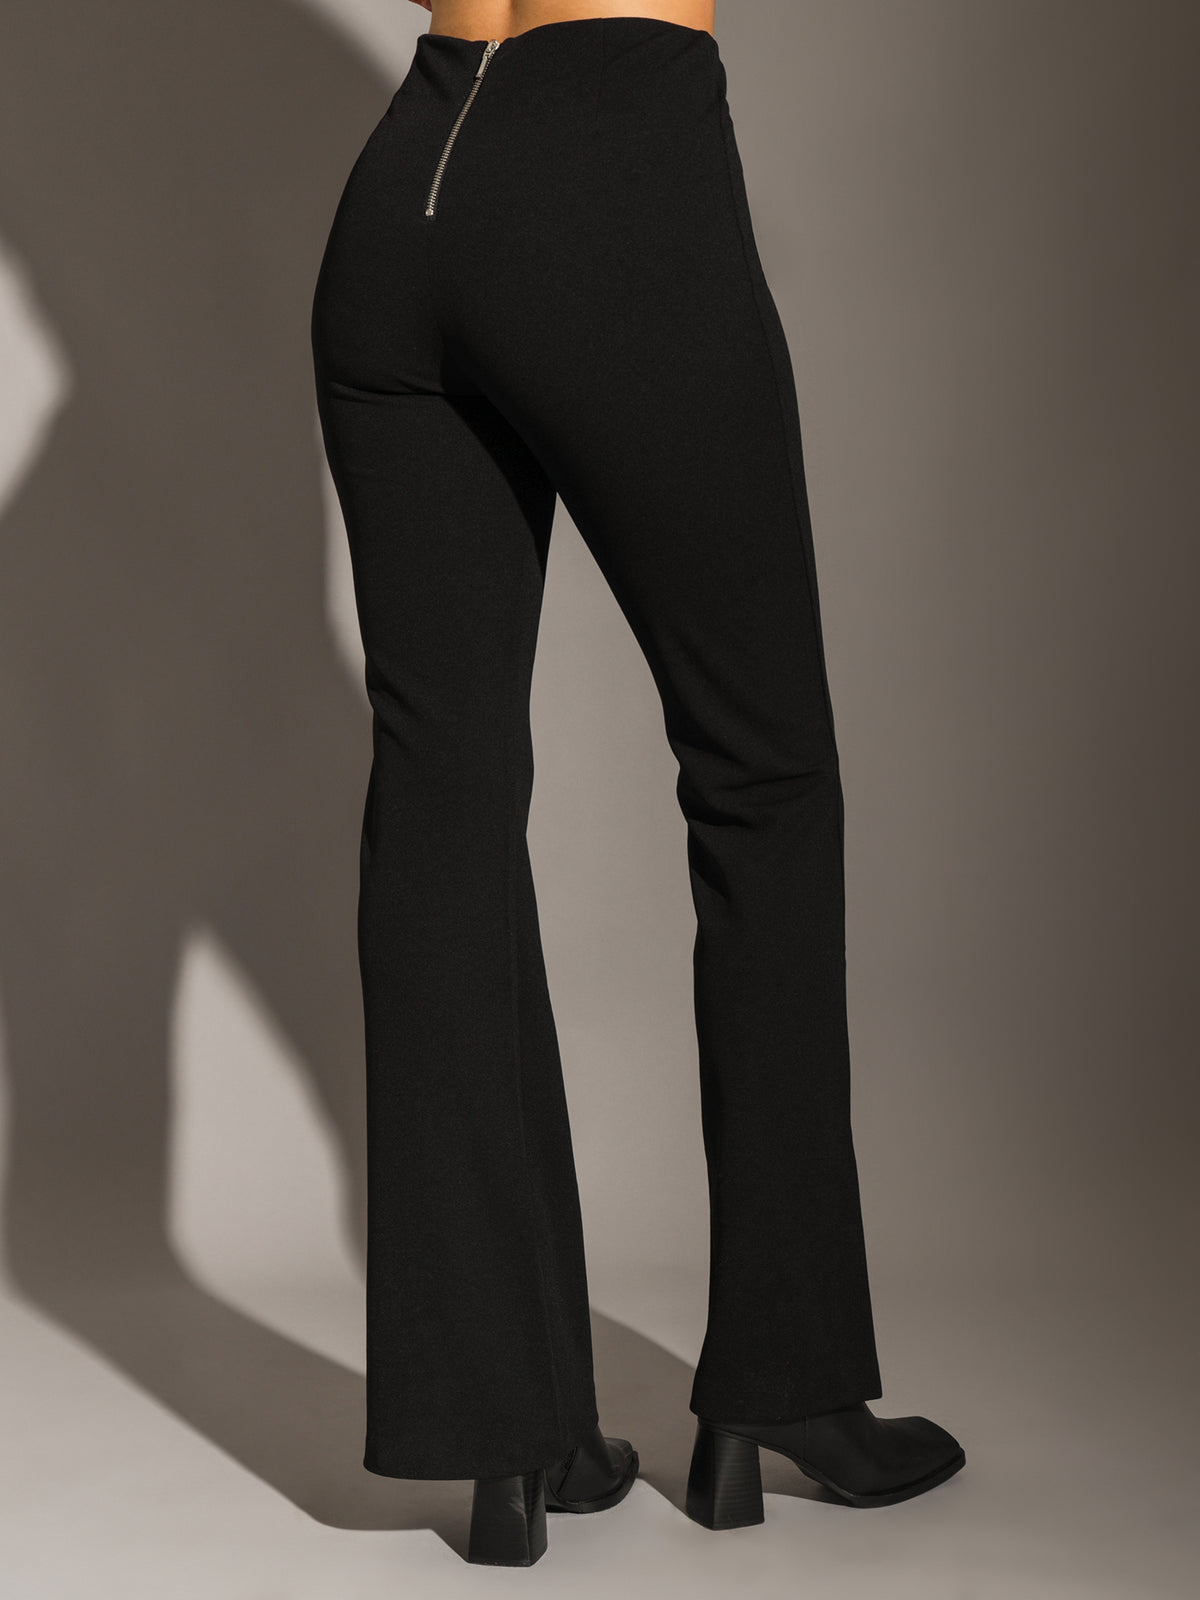 Alexia Flared Crepe Pants in Black